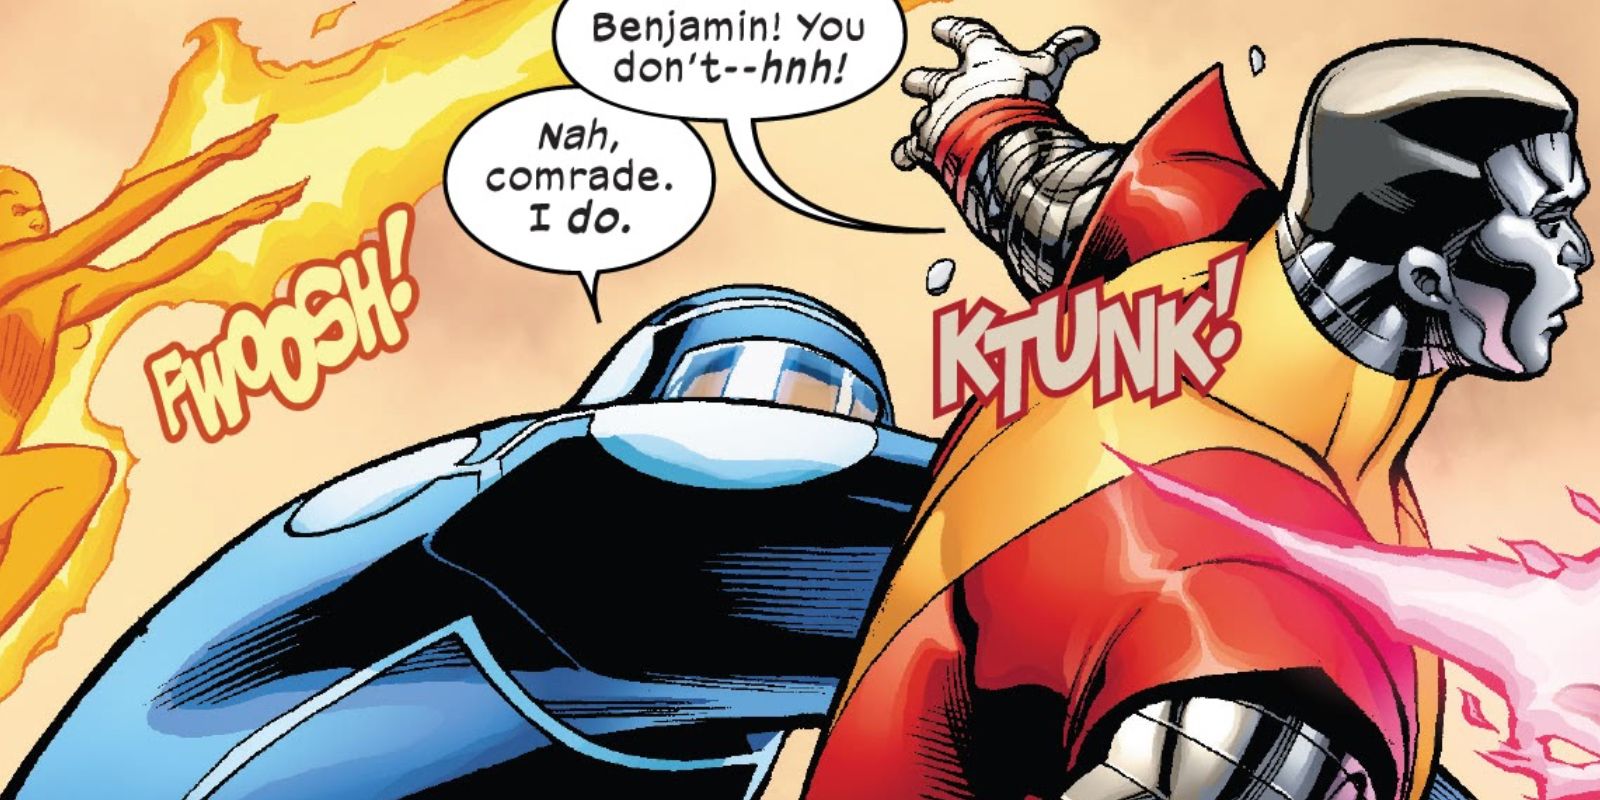 X-Men's Colossus vs Fantastic Four's Thing: Who'd Win.